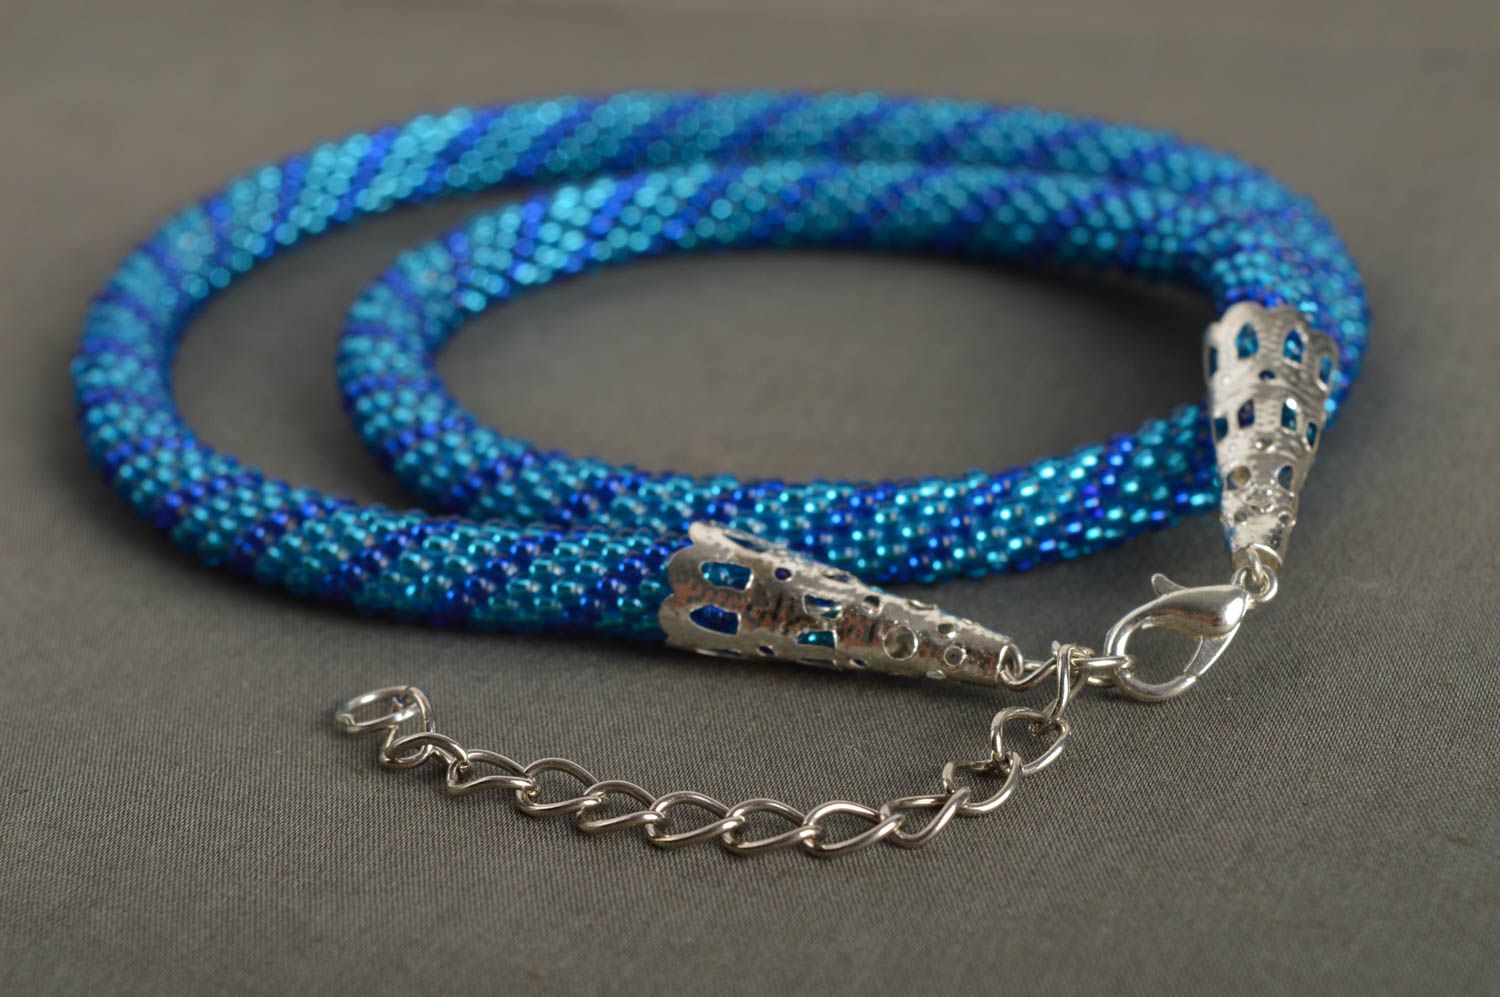 Handmade blue elegant necklace beaded cord necklace unusual accessory gift photo 1